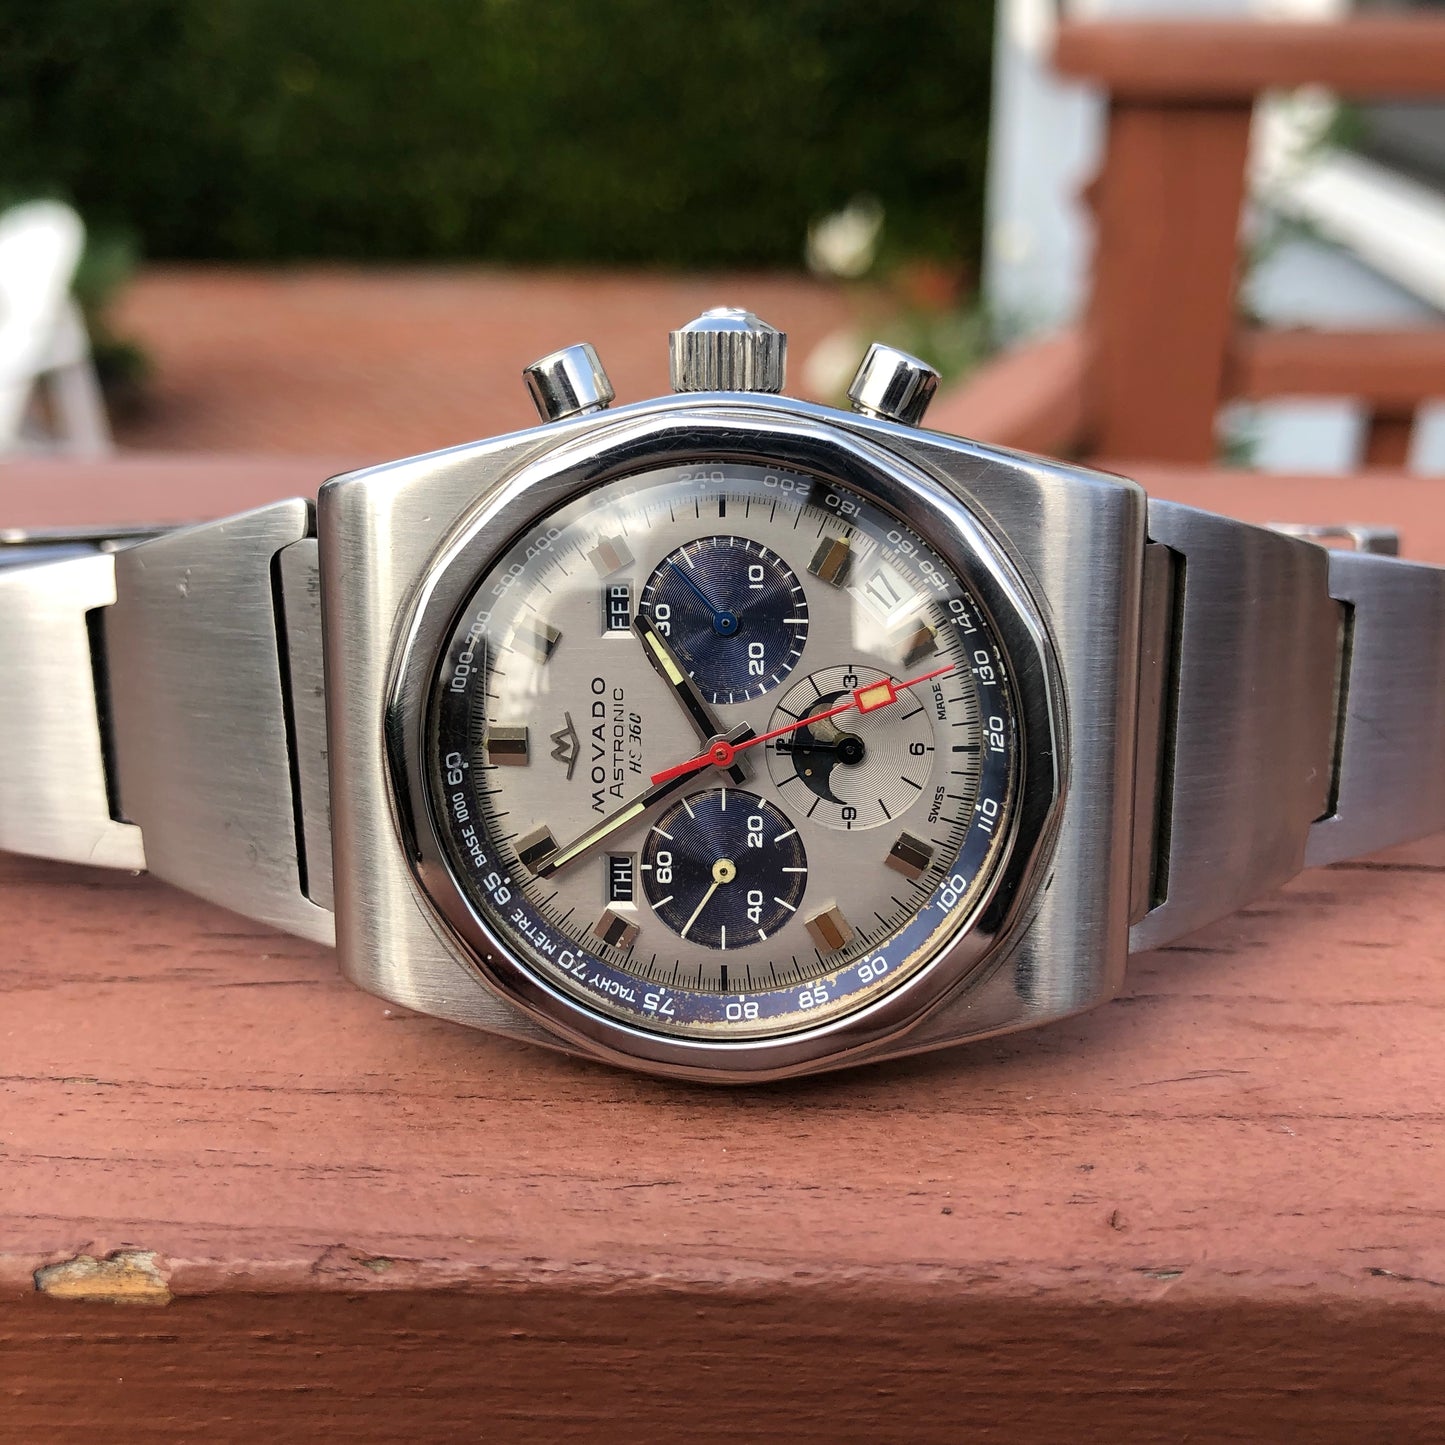 Vintage Movado Astronic HS360 Super Sub Sea El Primero Chronograph Stainless Steel Wristwatch - Hashtag Watch Company